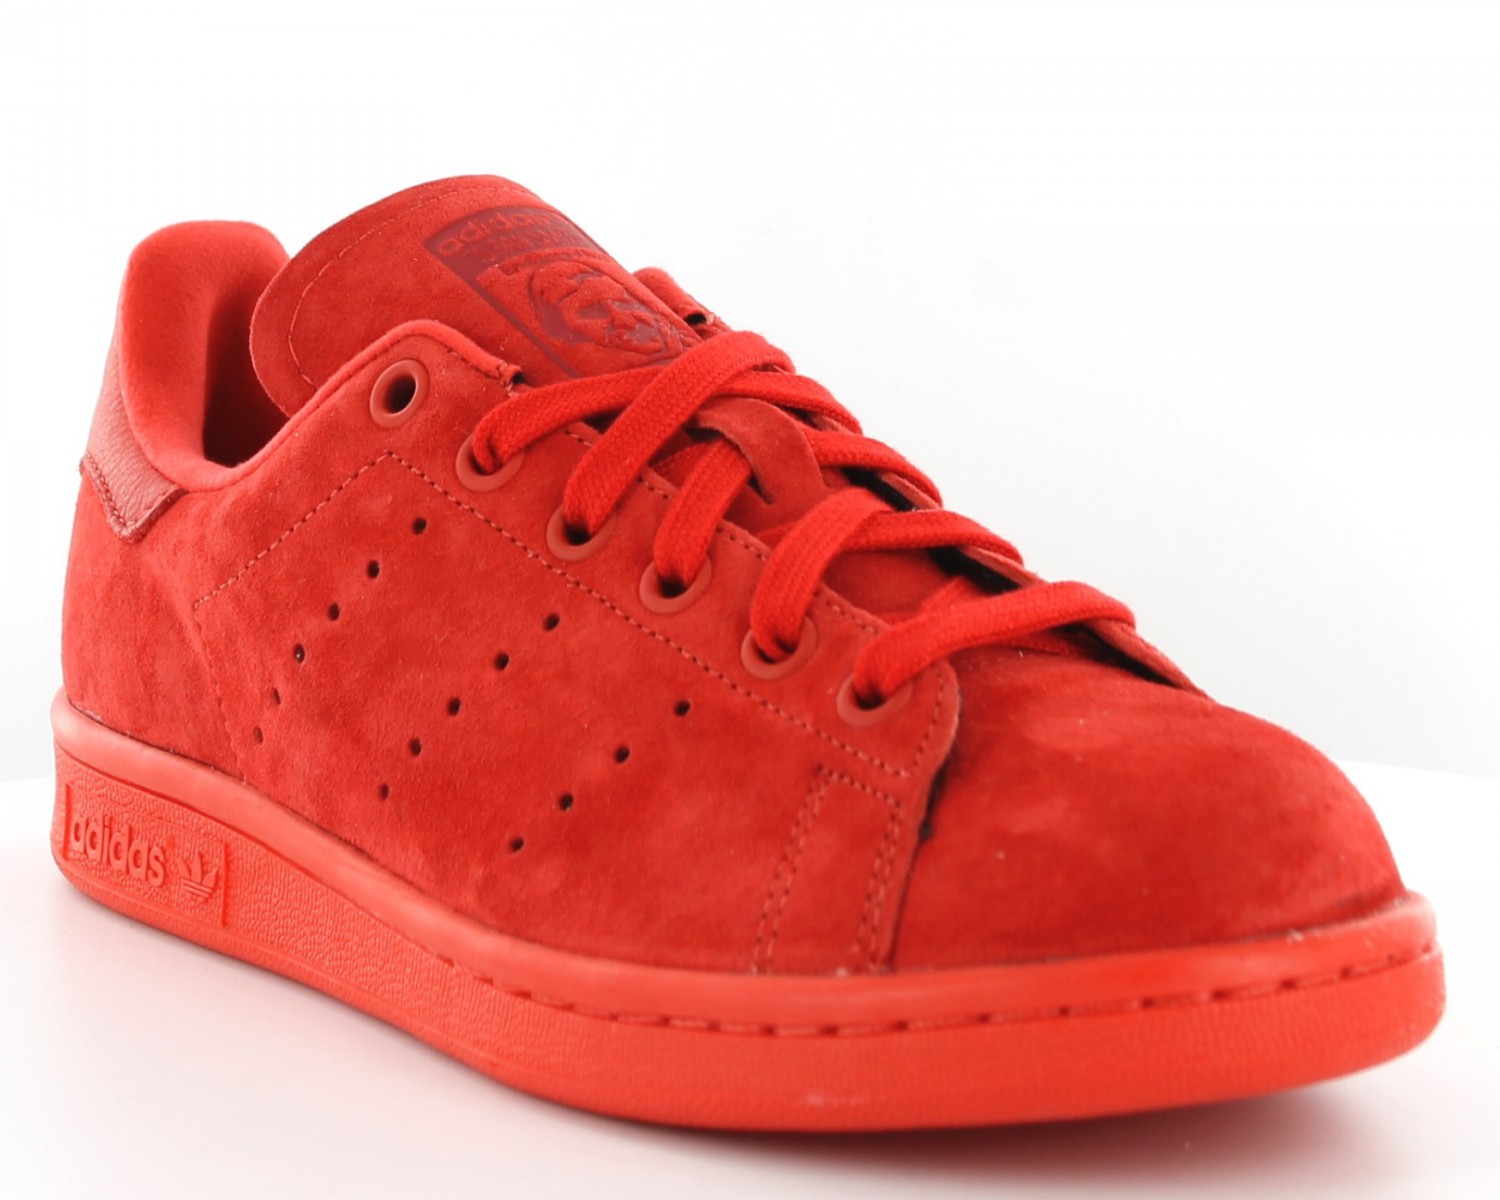 Cheap shoe  Sneakers stan smith monochrome suede Adidas  ROUGE 